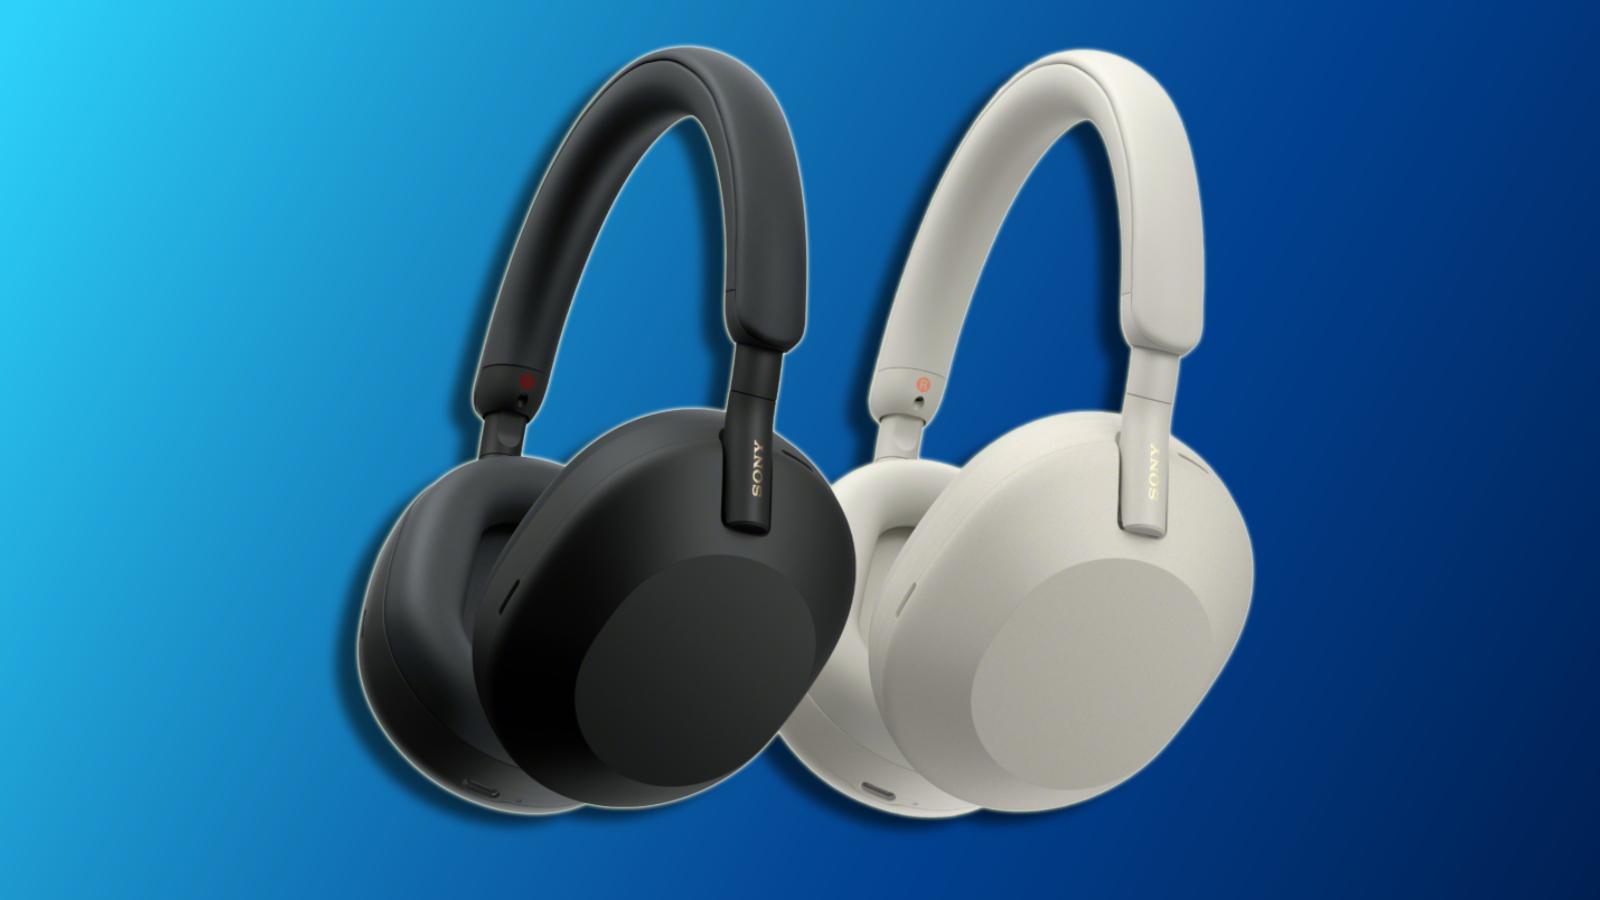 Overall Best noise canceling headphones: Sony WH-1000XM5 on a gradient background